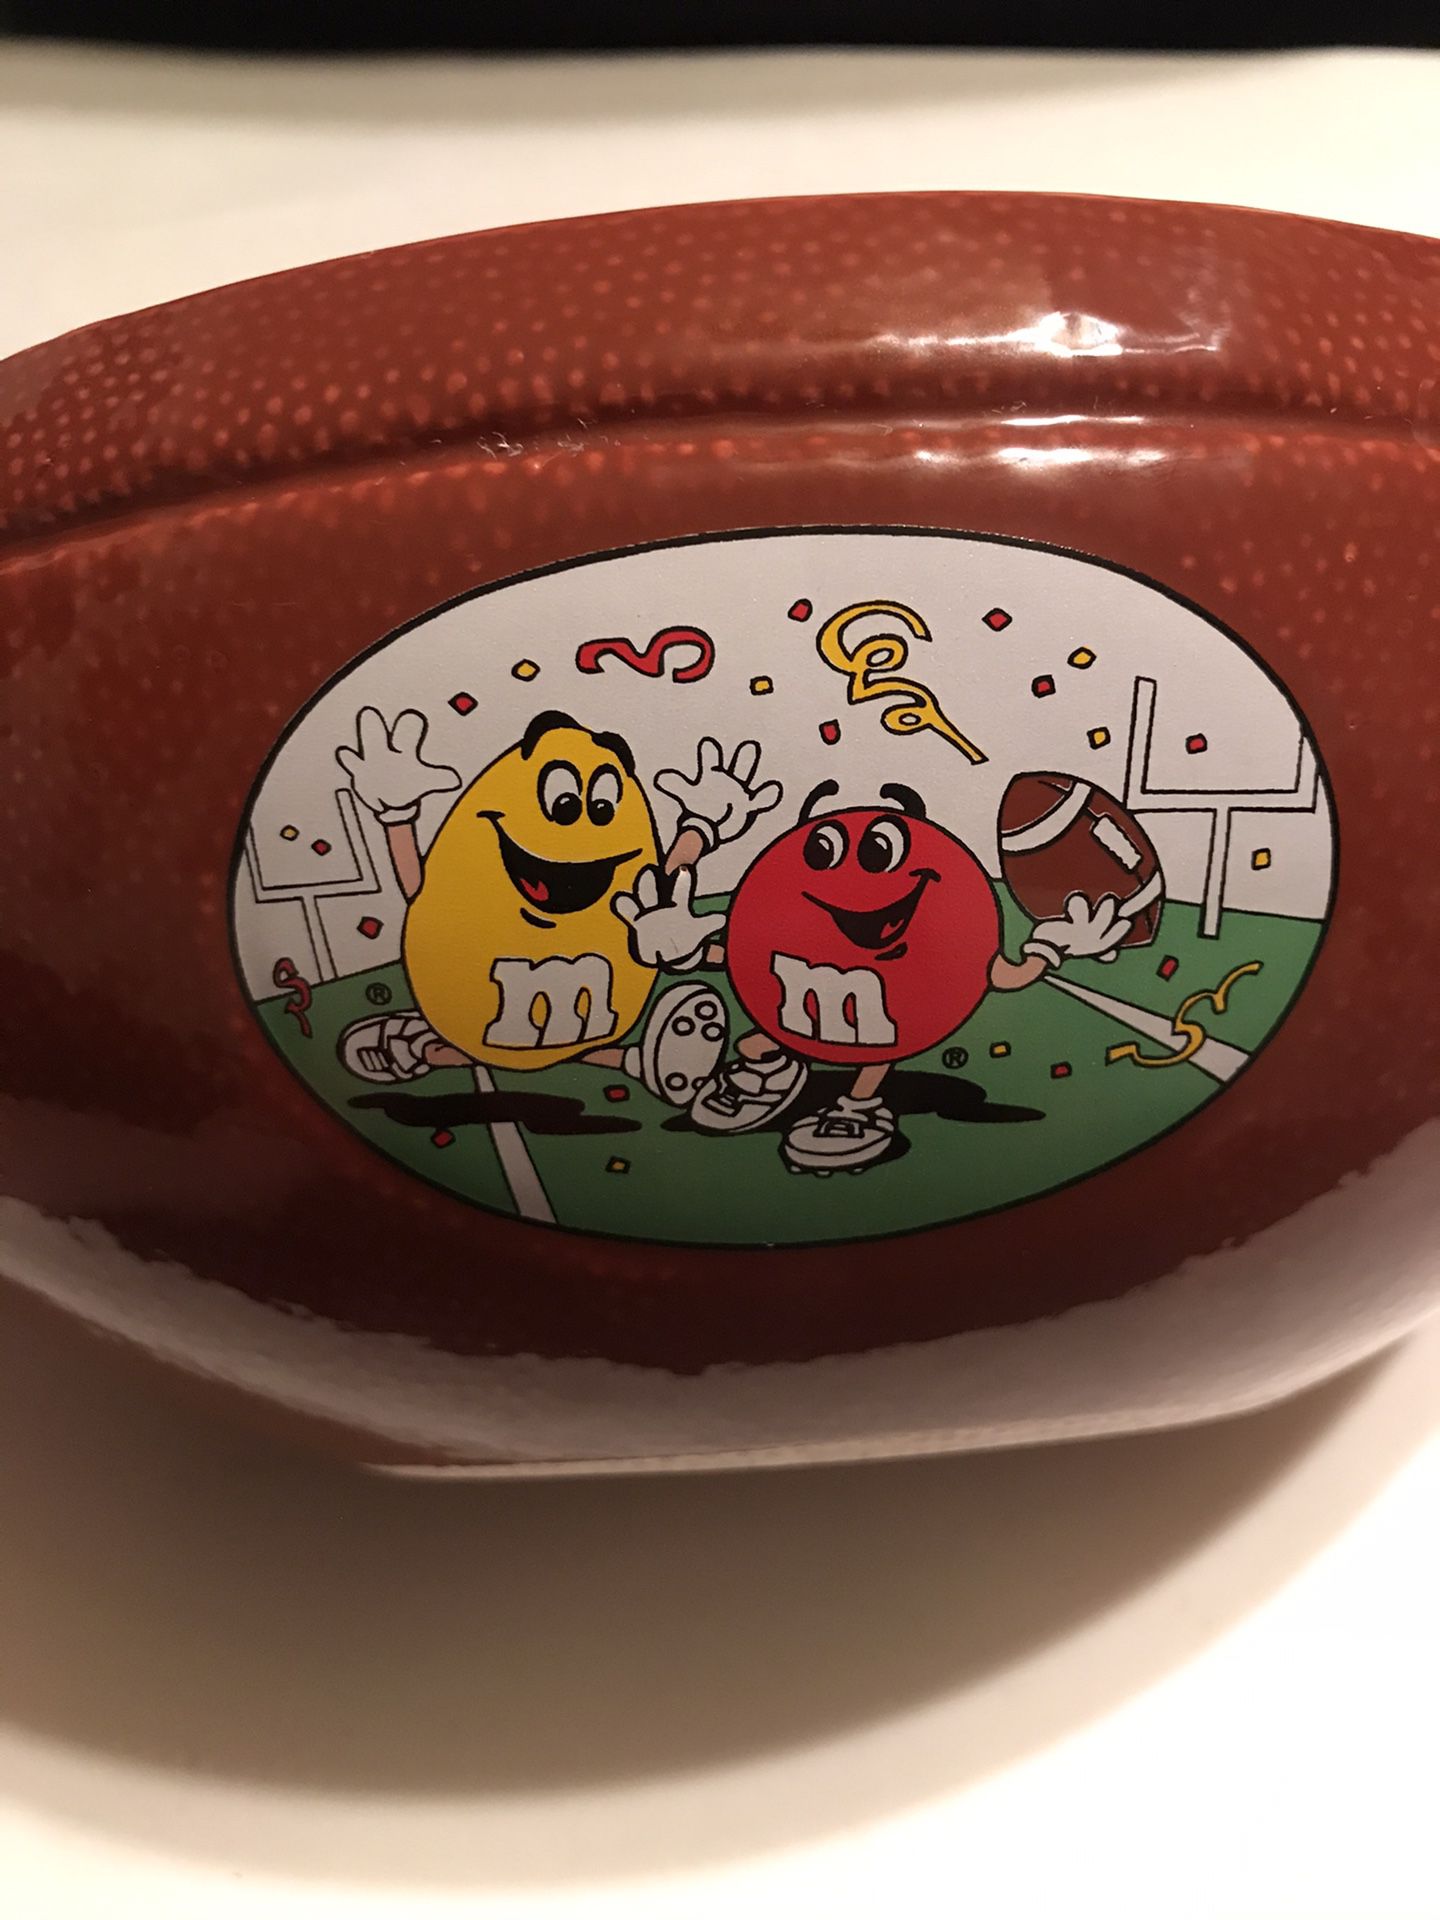 1980’s M&M Football Shaped Ceramic Candy Dish Divided Bowl w/ M&M’s Design